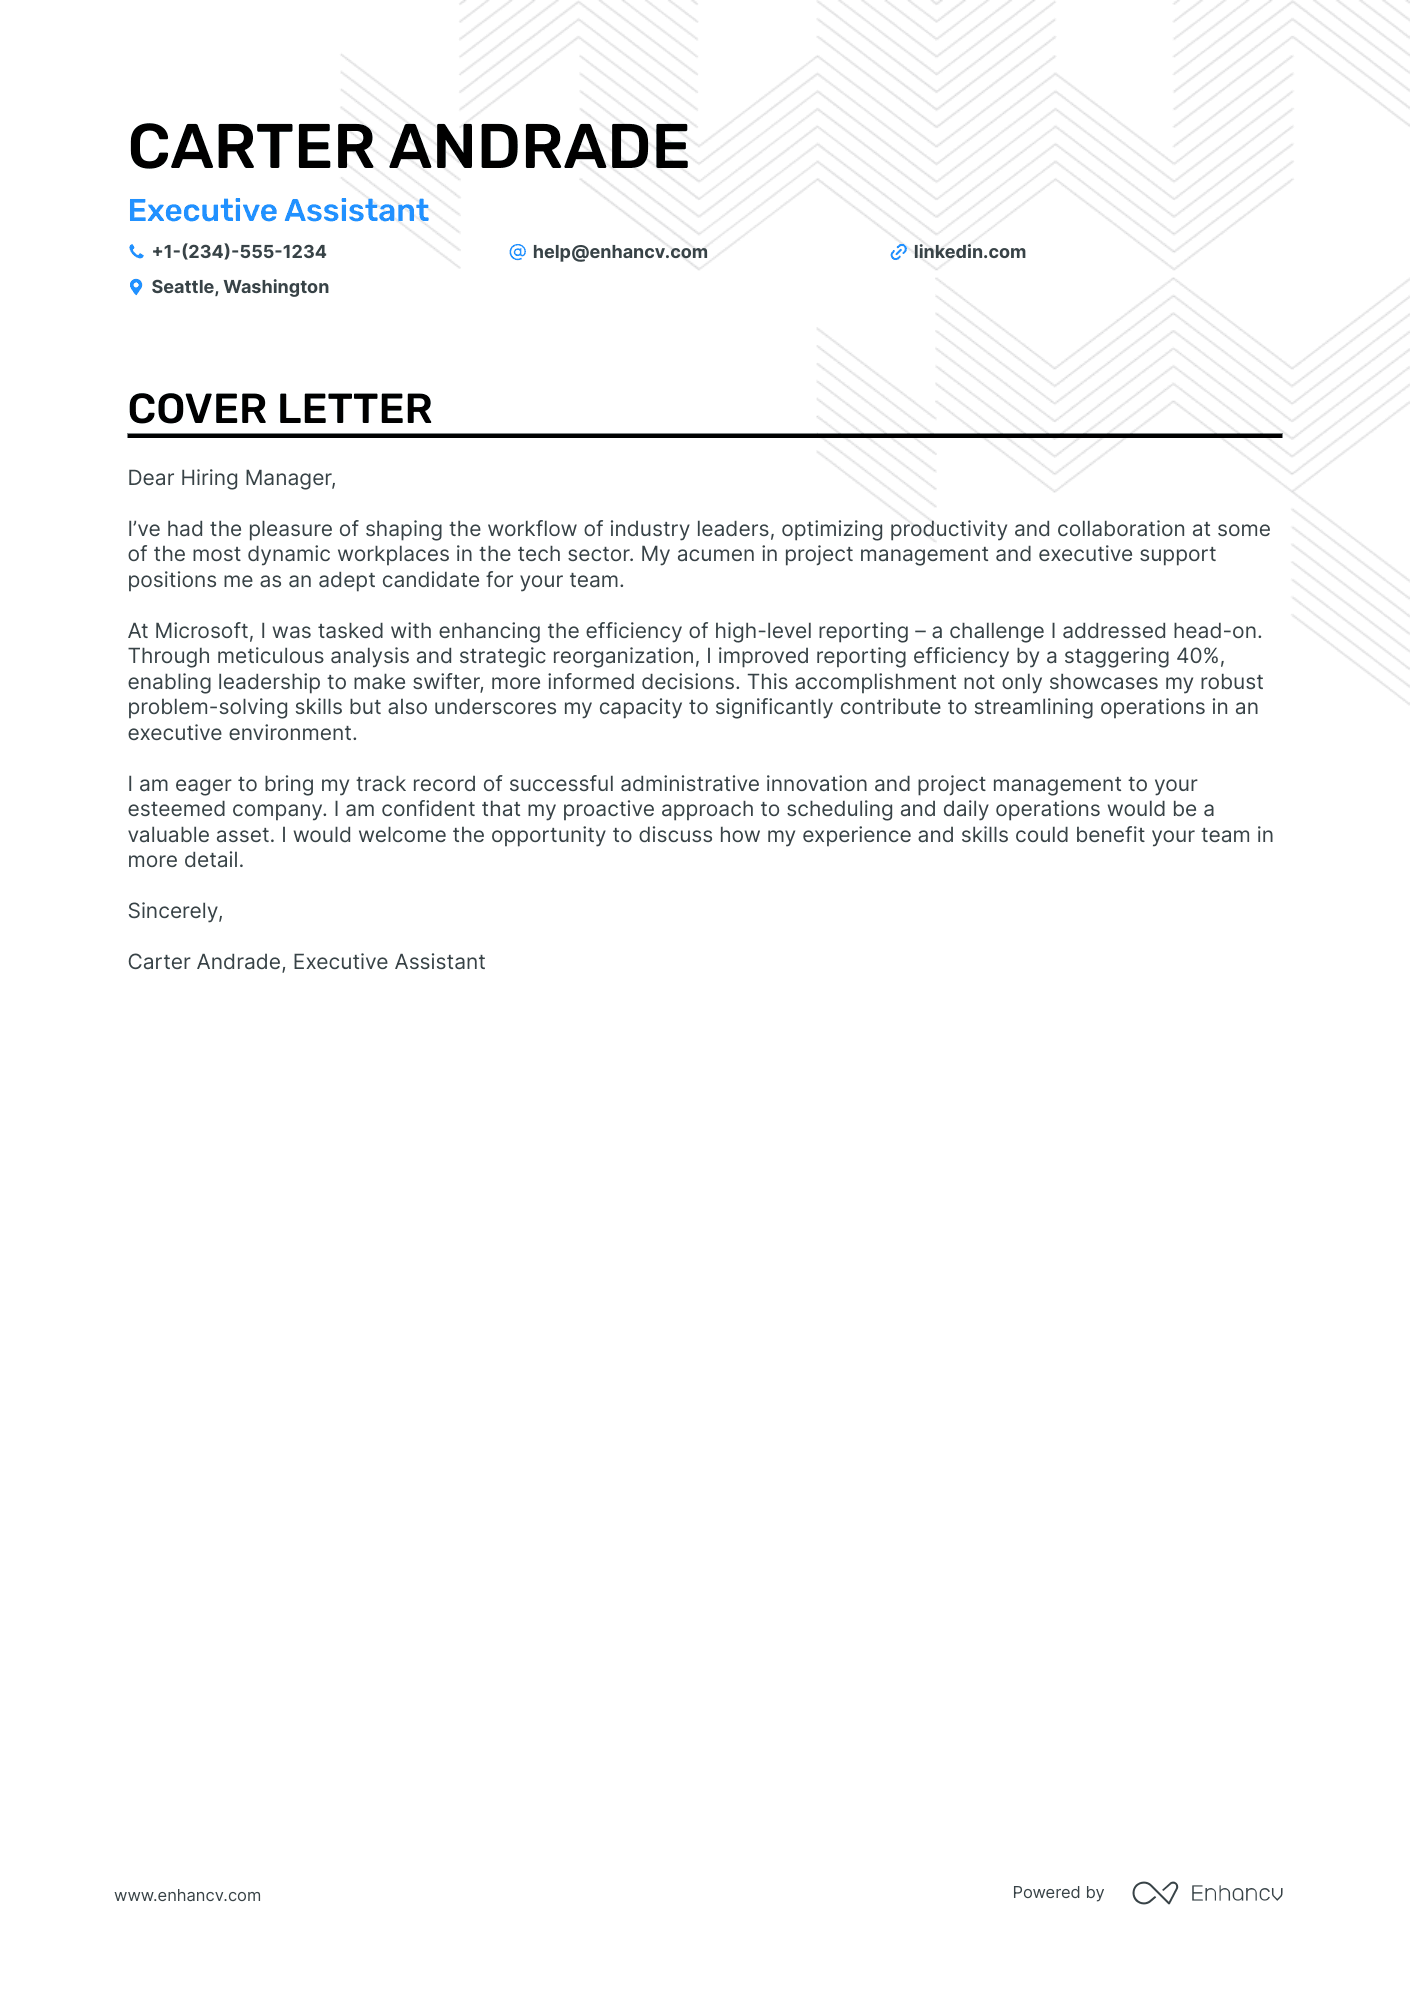 application letter for personal assistant job